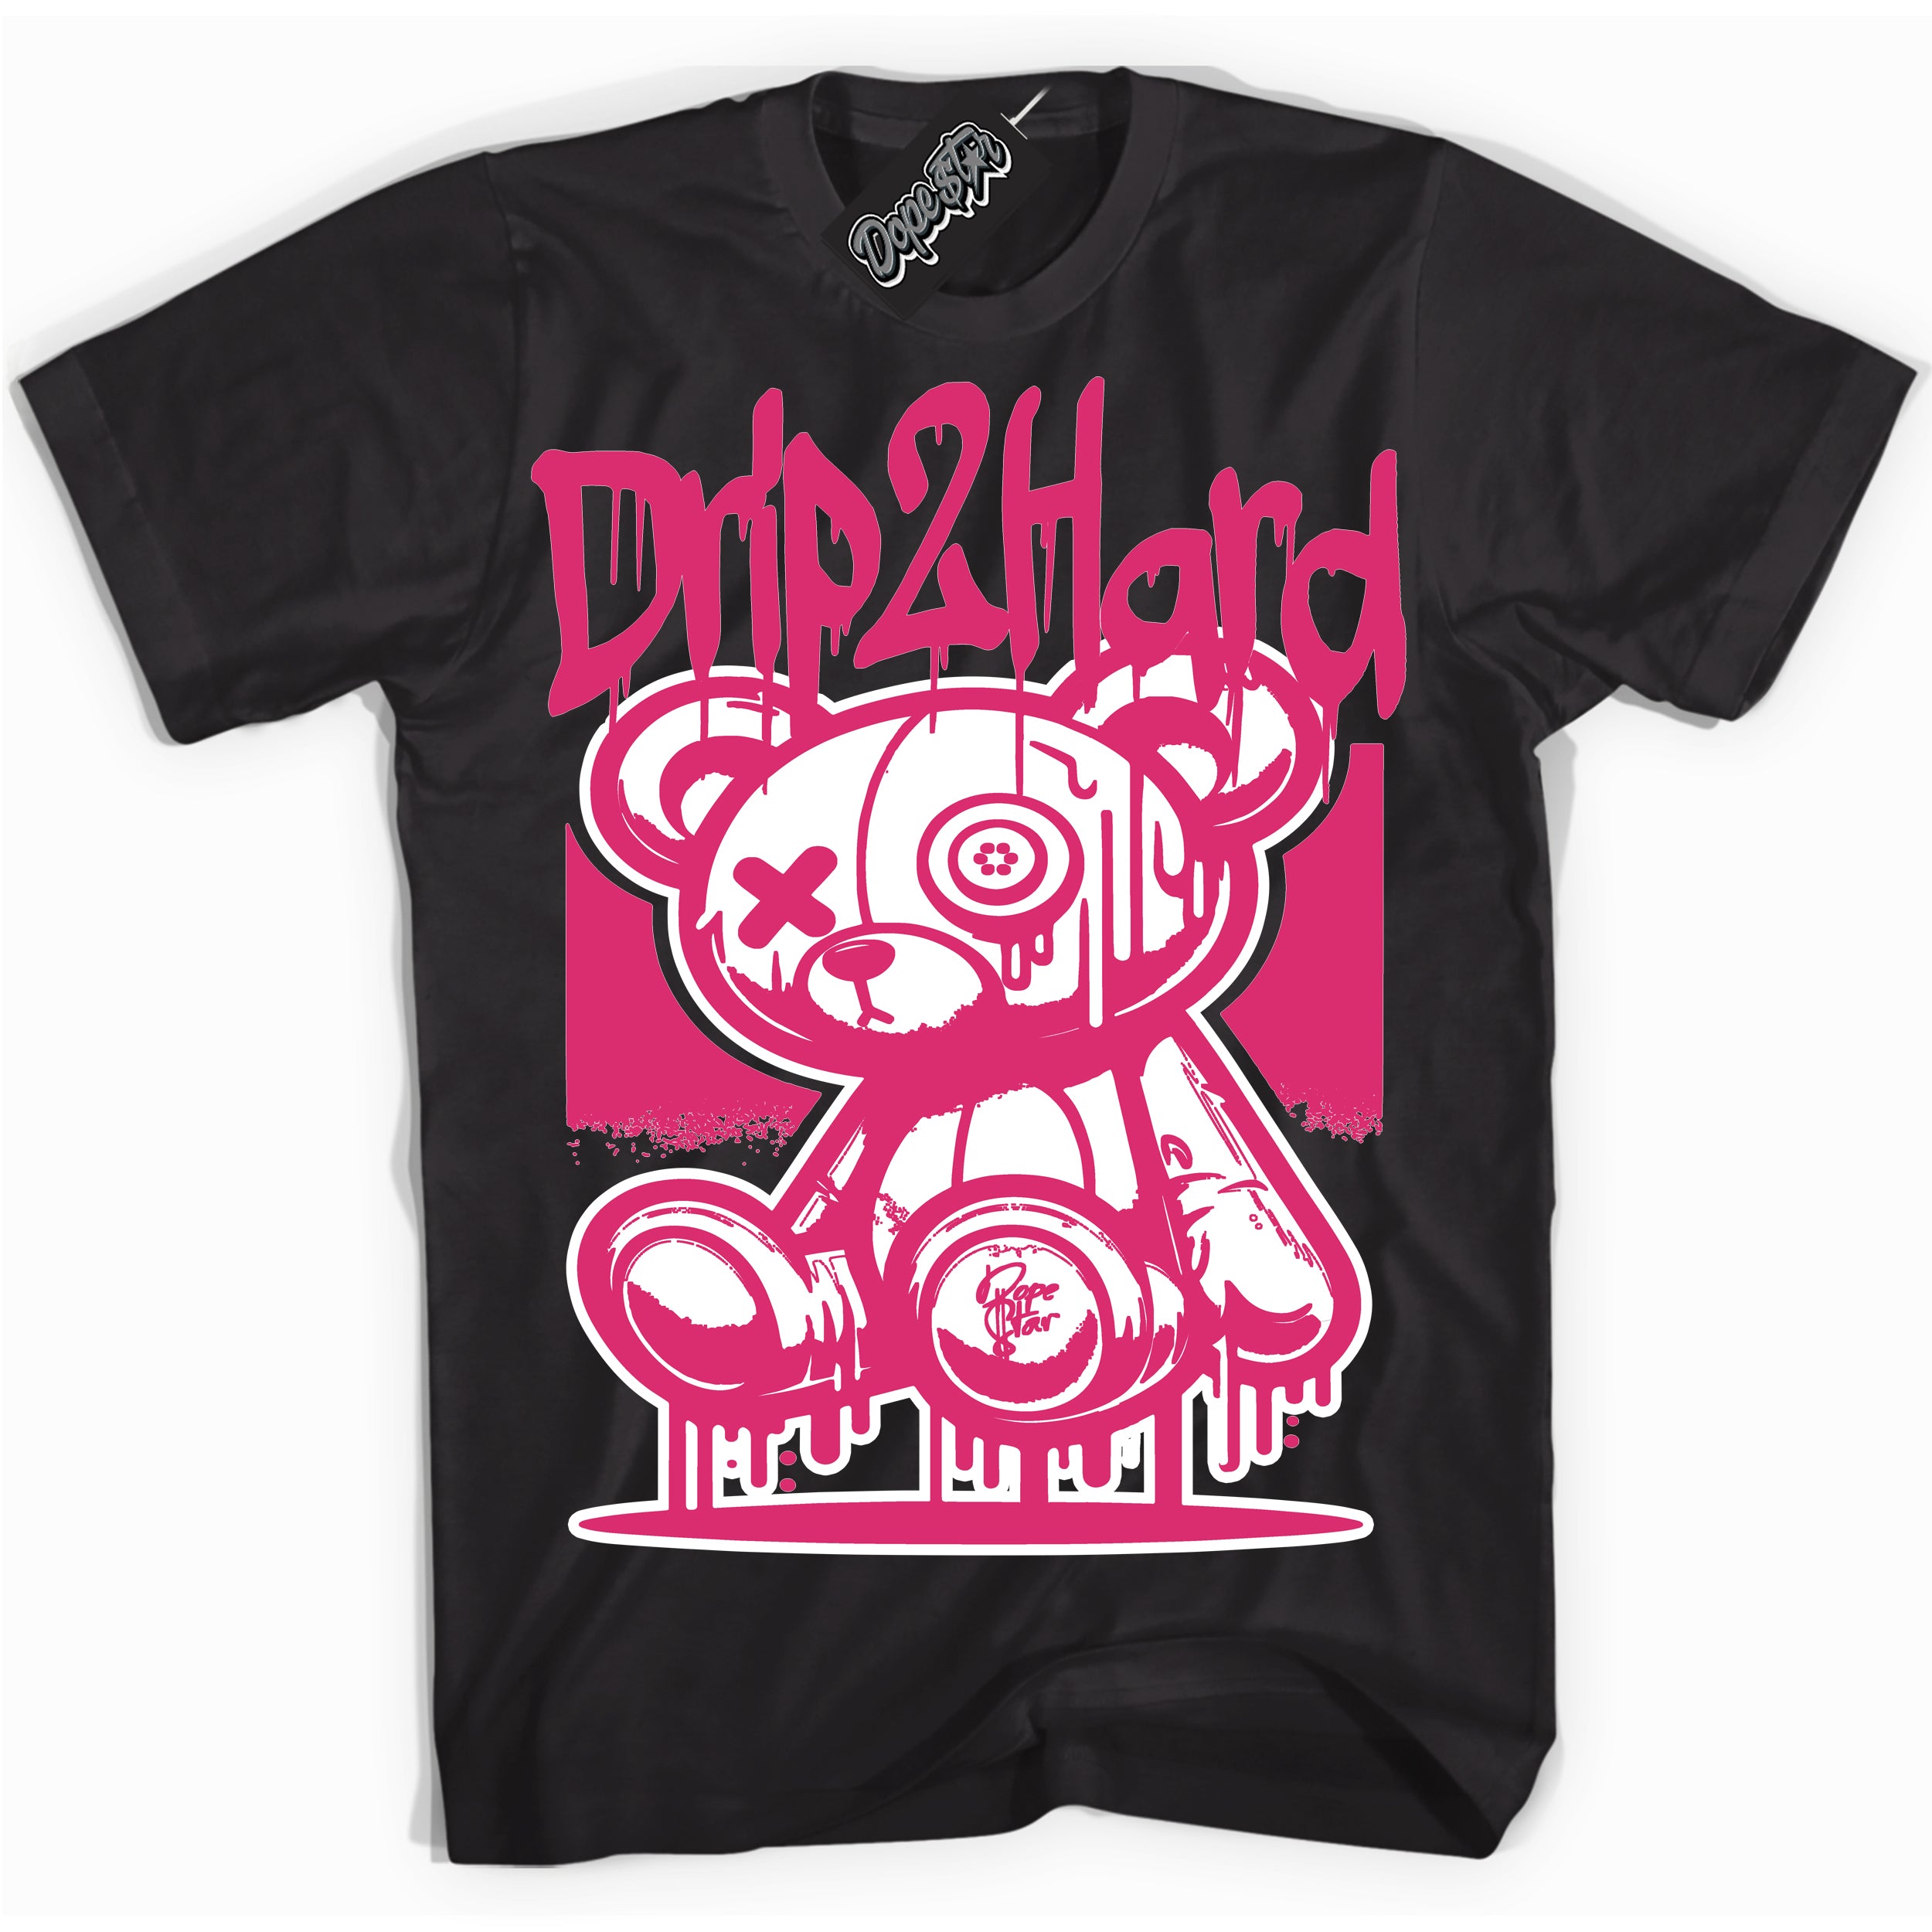 Cool Black graphic tee with “ Drip 2 Hard ” design, that perfectly matches Pink Prime